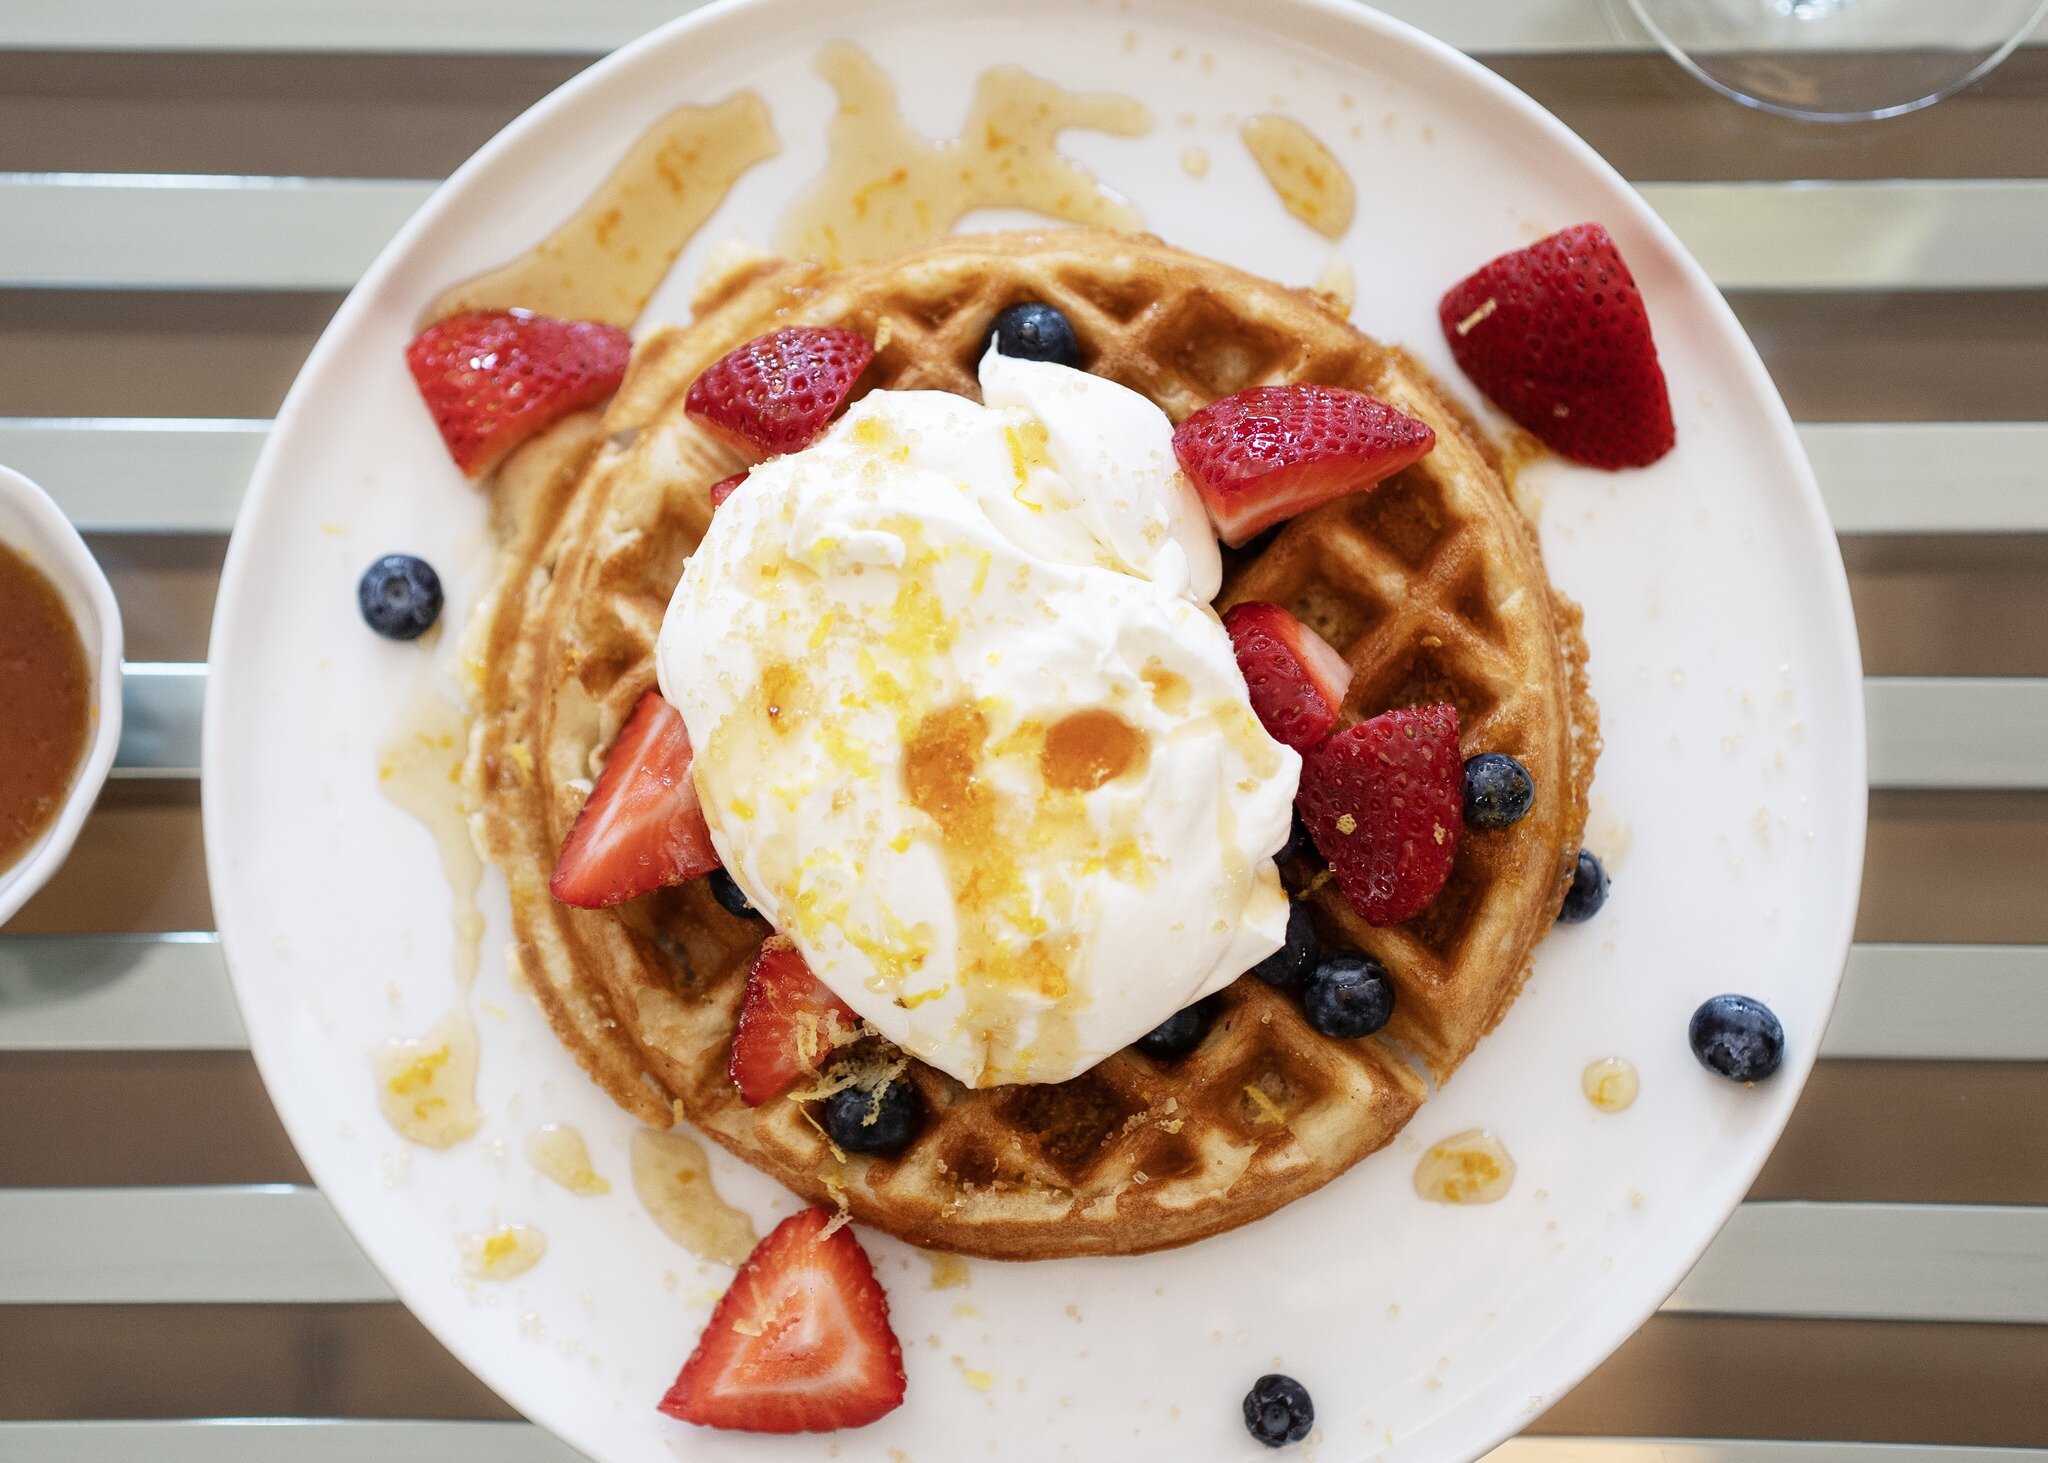 Its just about brunch time at Vintage, baby! Come for waffles &amp; wine and then roll right into Champagne Social Club at 3 PM. 

We also have live music by @desiandcody tomorrow from 3-5 PM!